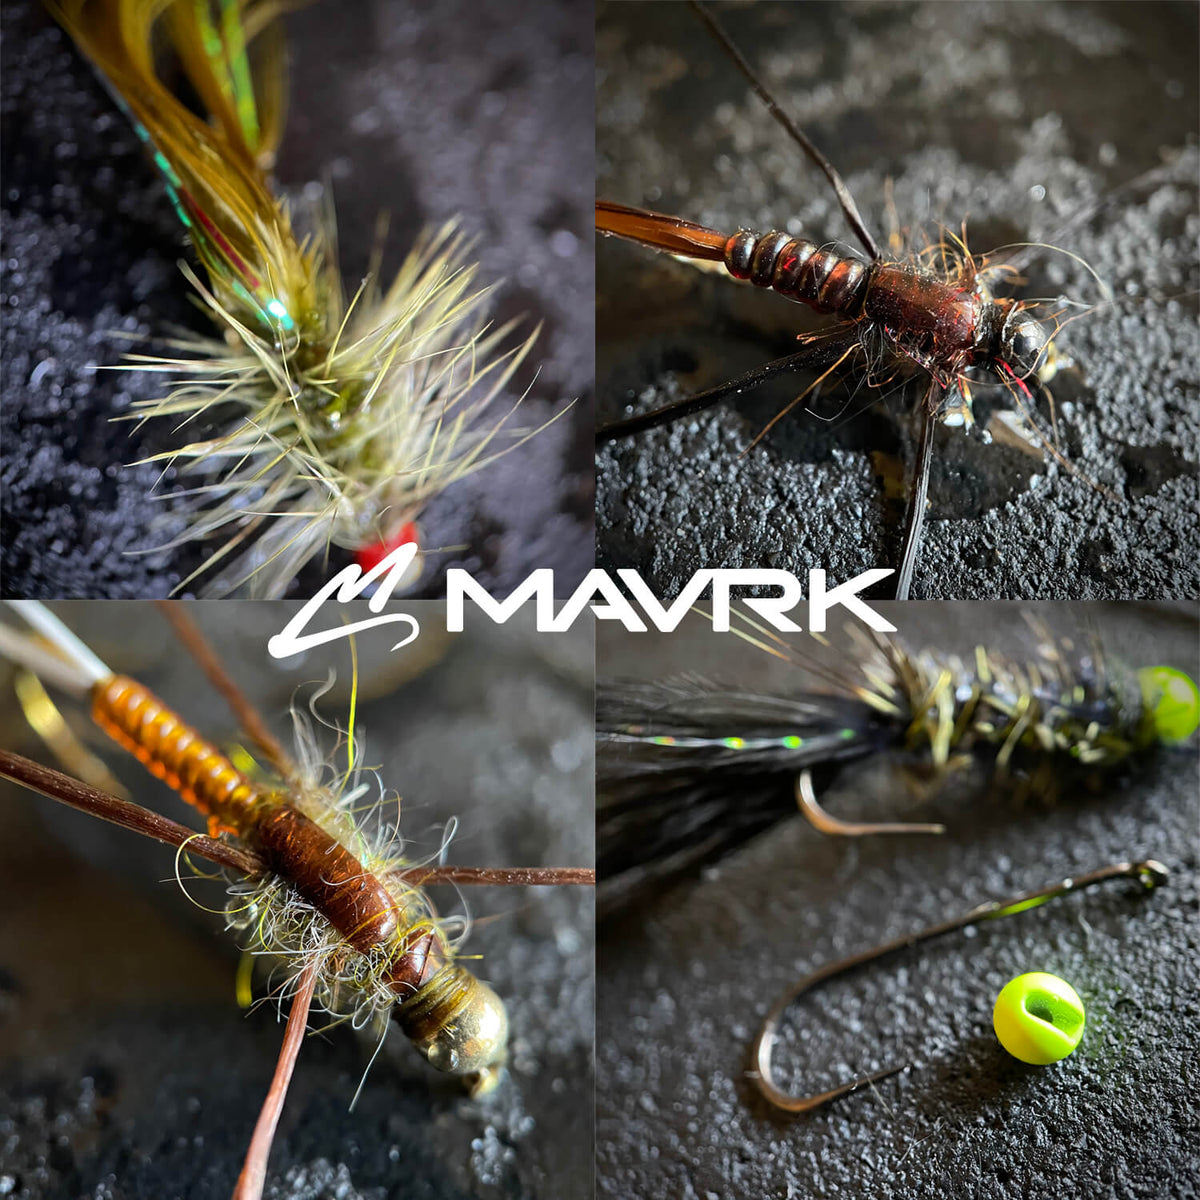  Mavrk Fly Fishing Euro Nymph Competition Barbless Hooks 25  Pack for Fly Tying Black Nickel Coating Strong Durable chemically sharpened  Jig Curve Nymph and Streamer Style : Sports & Outdoors